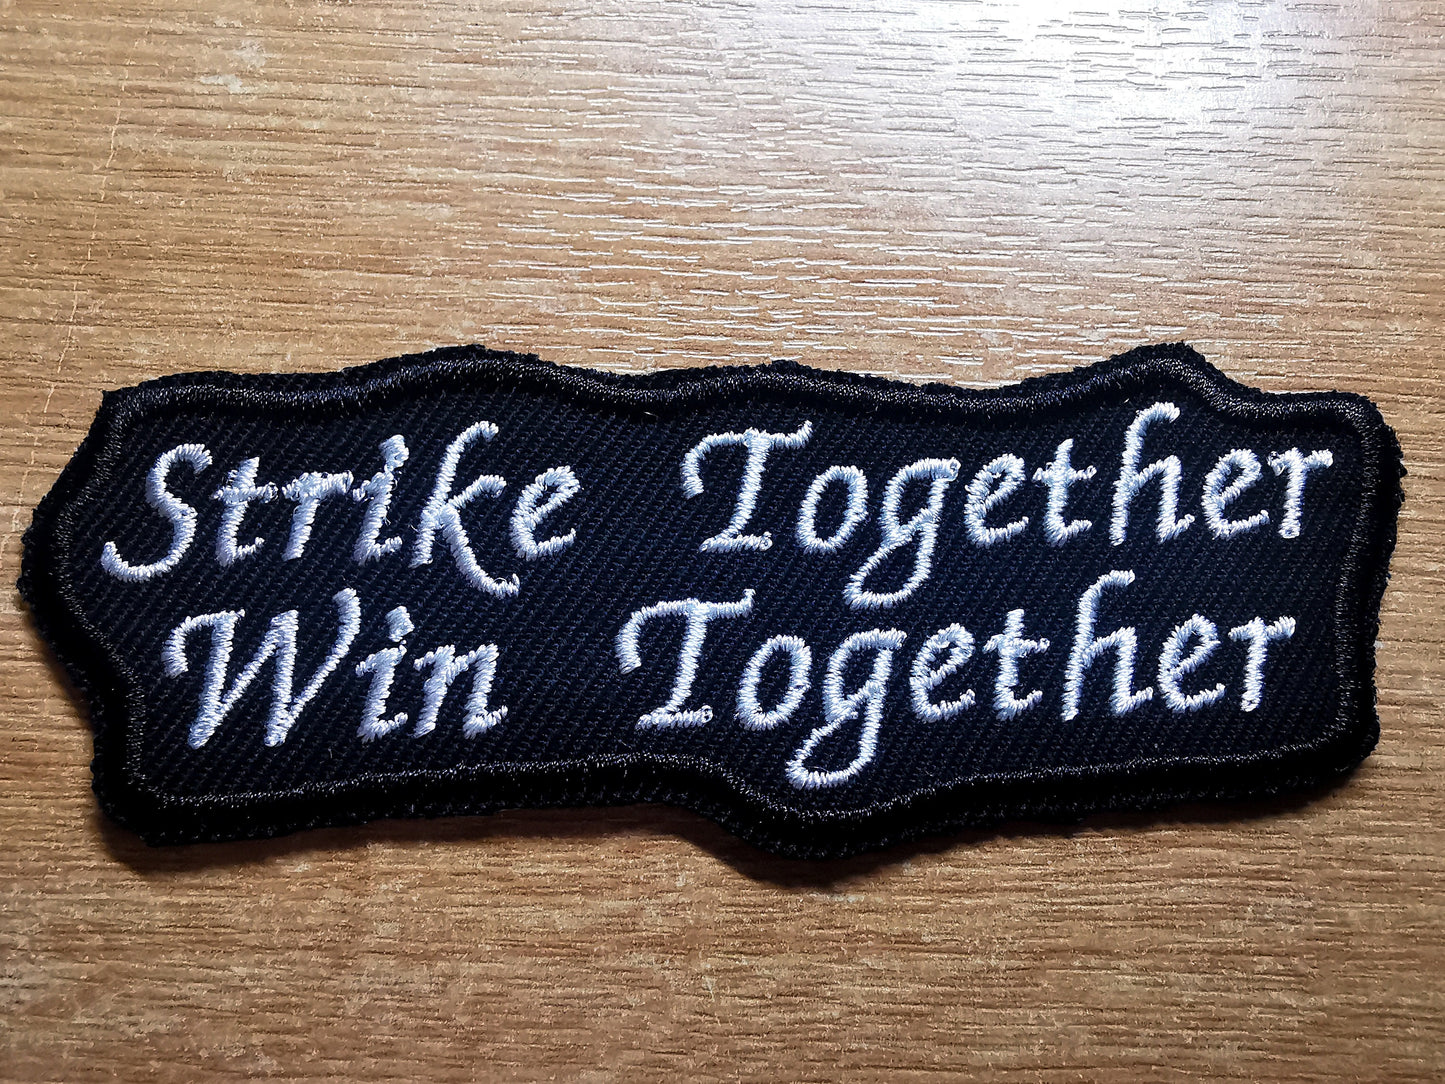 Pro Strike and Unions Embroidered Iron On Patch Politics Punk